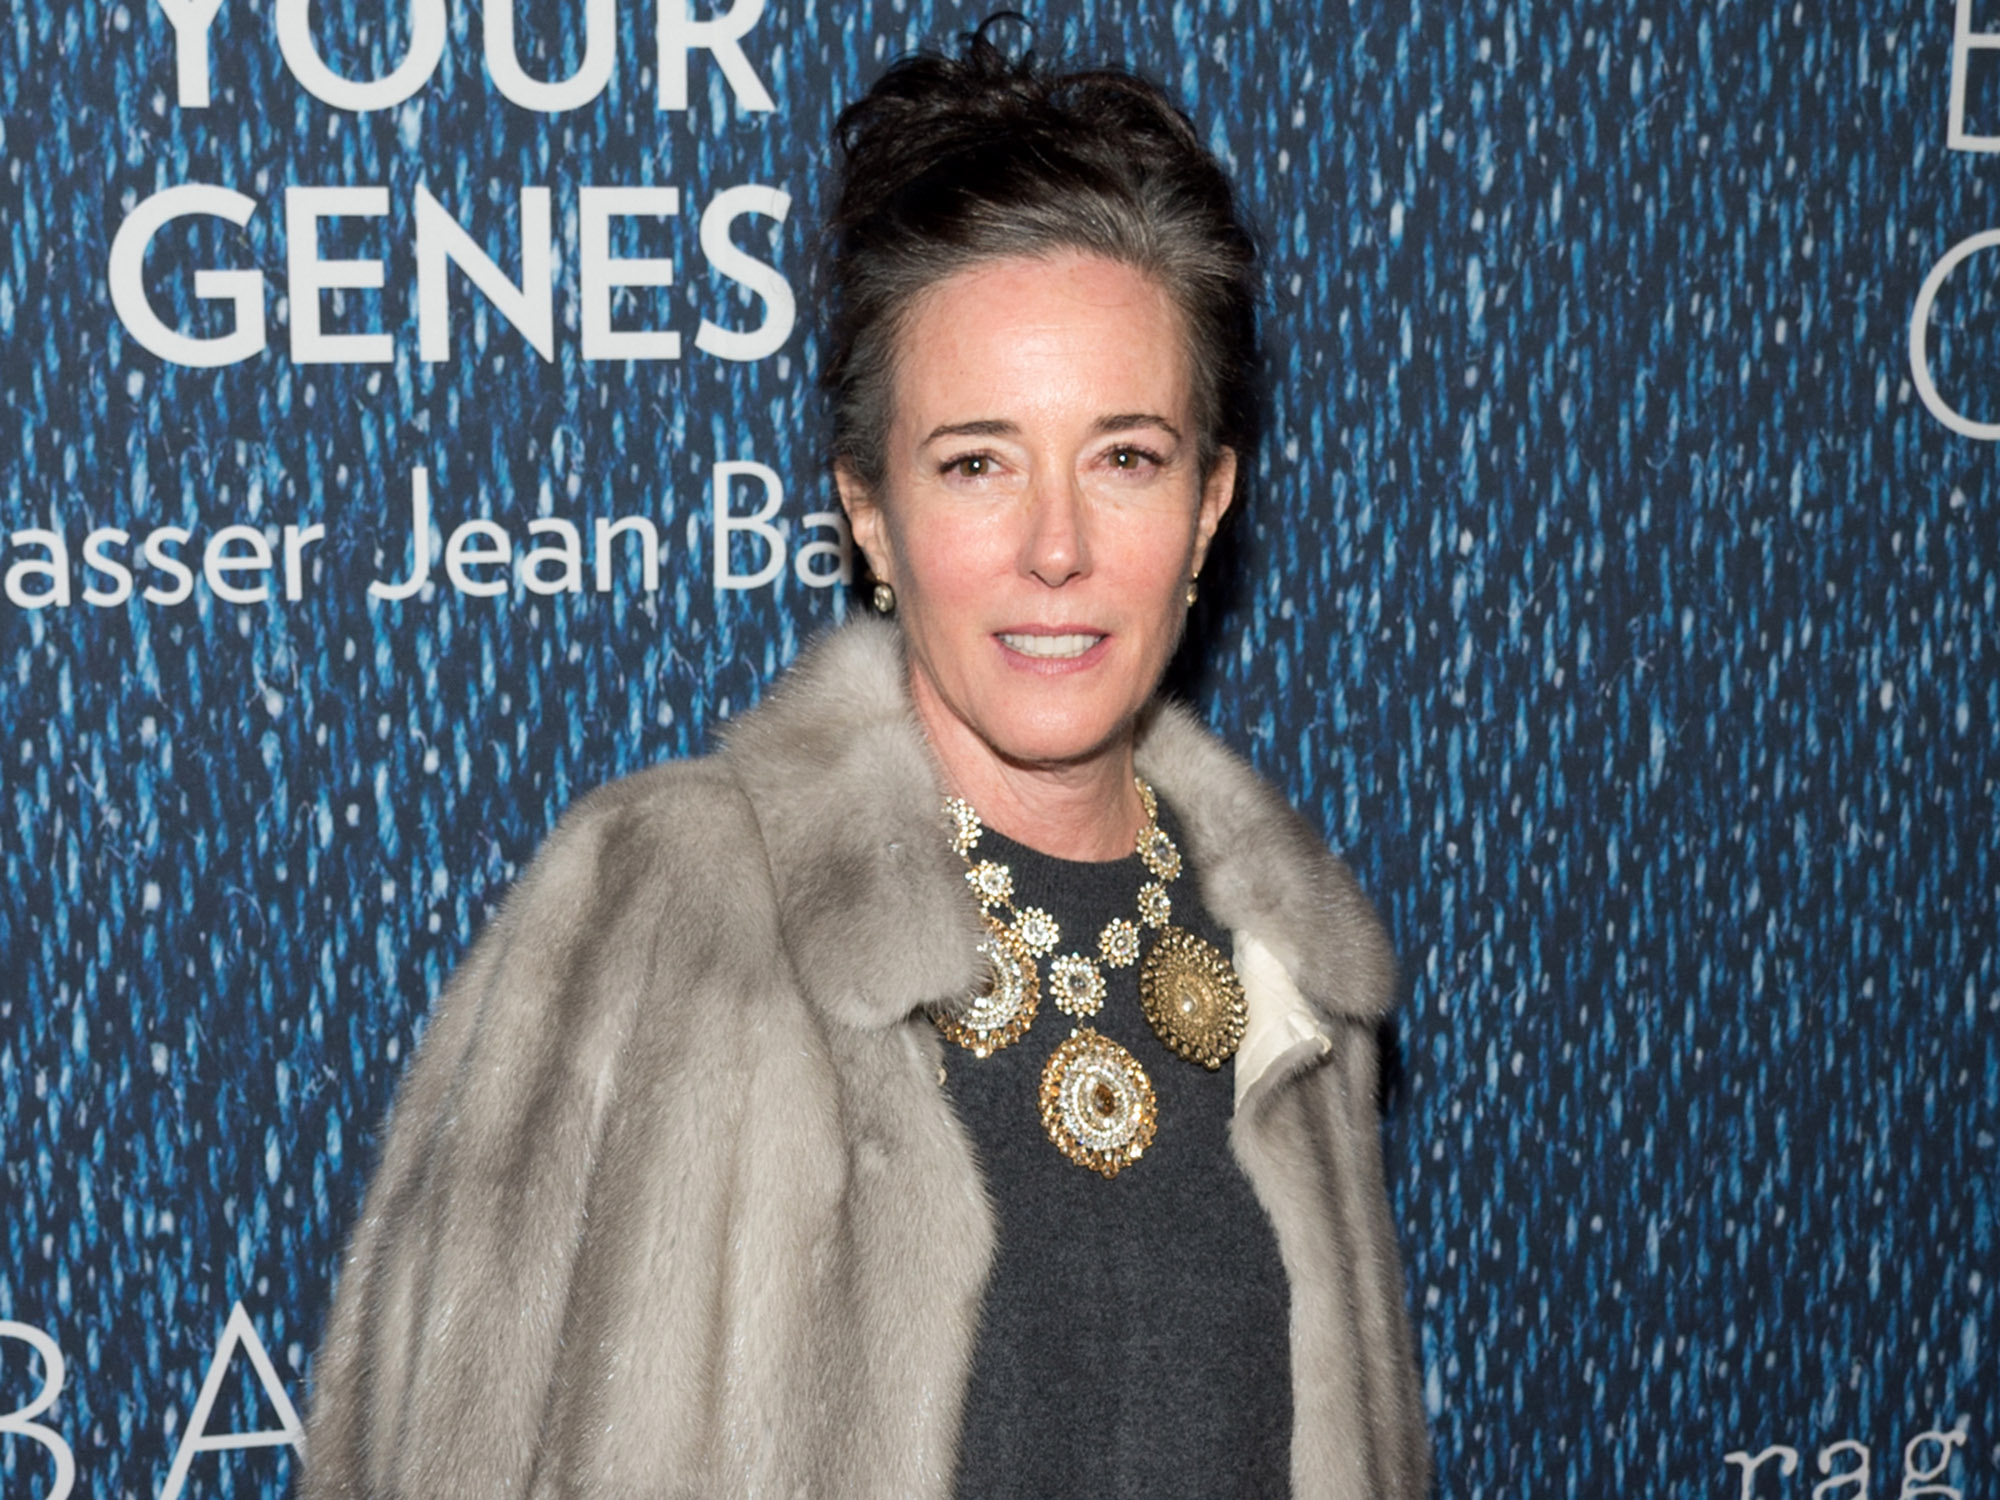 Kate Spade's Husband Says She Suffered From Depression - Bloomberg